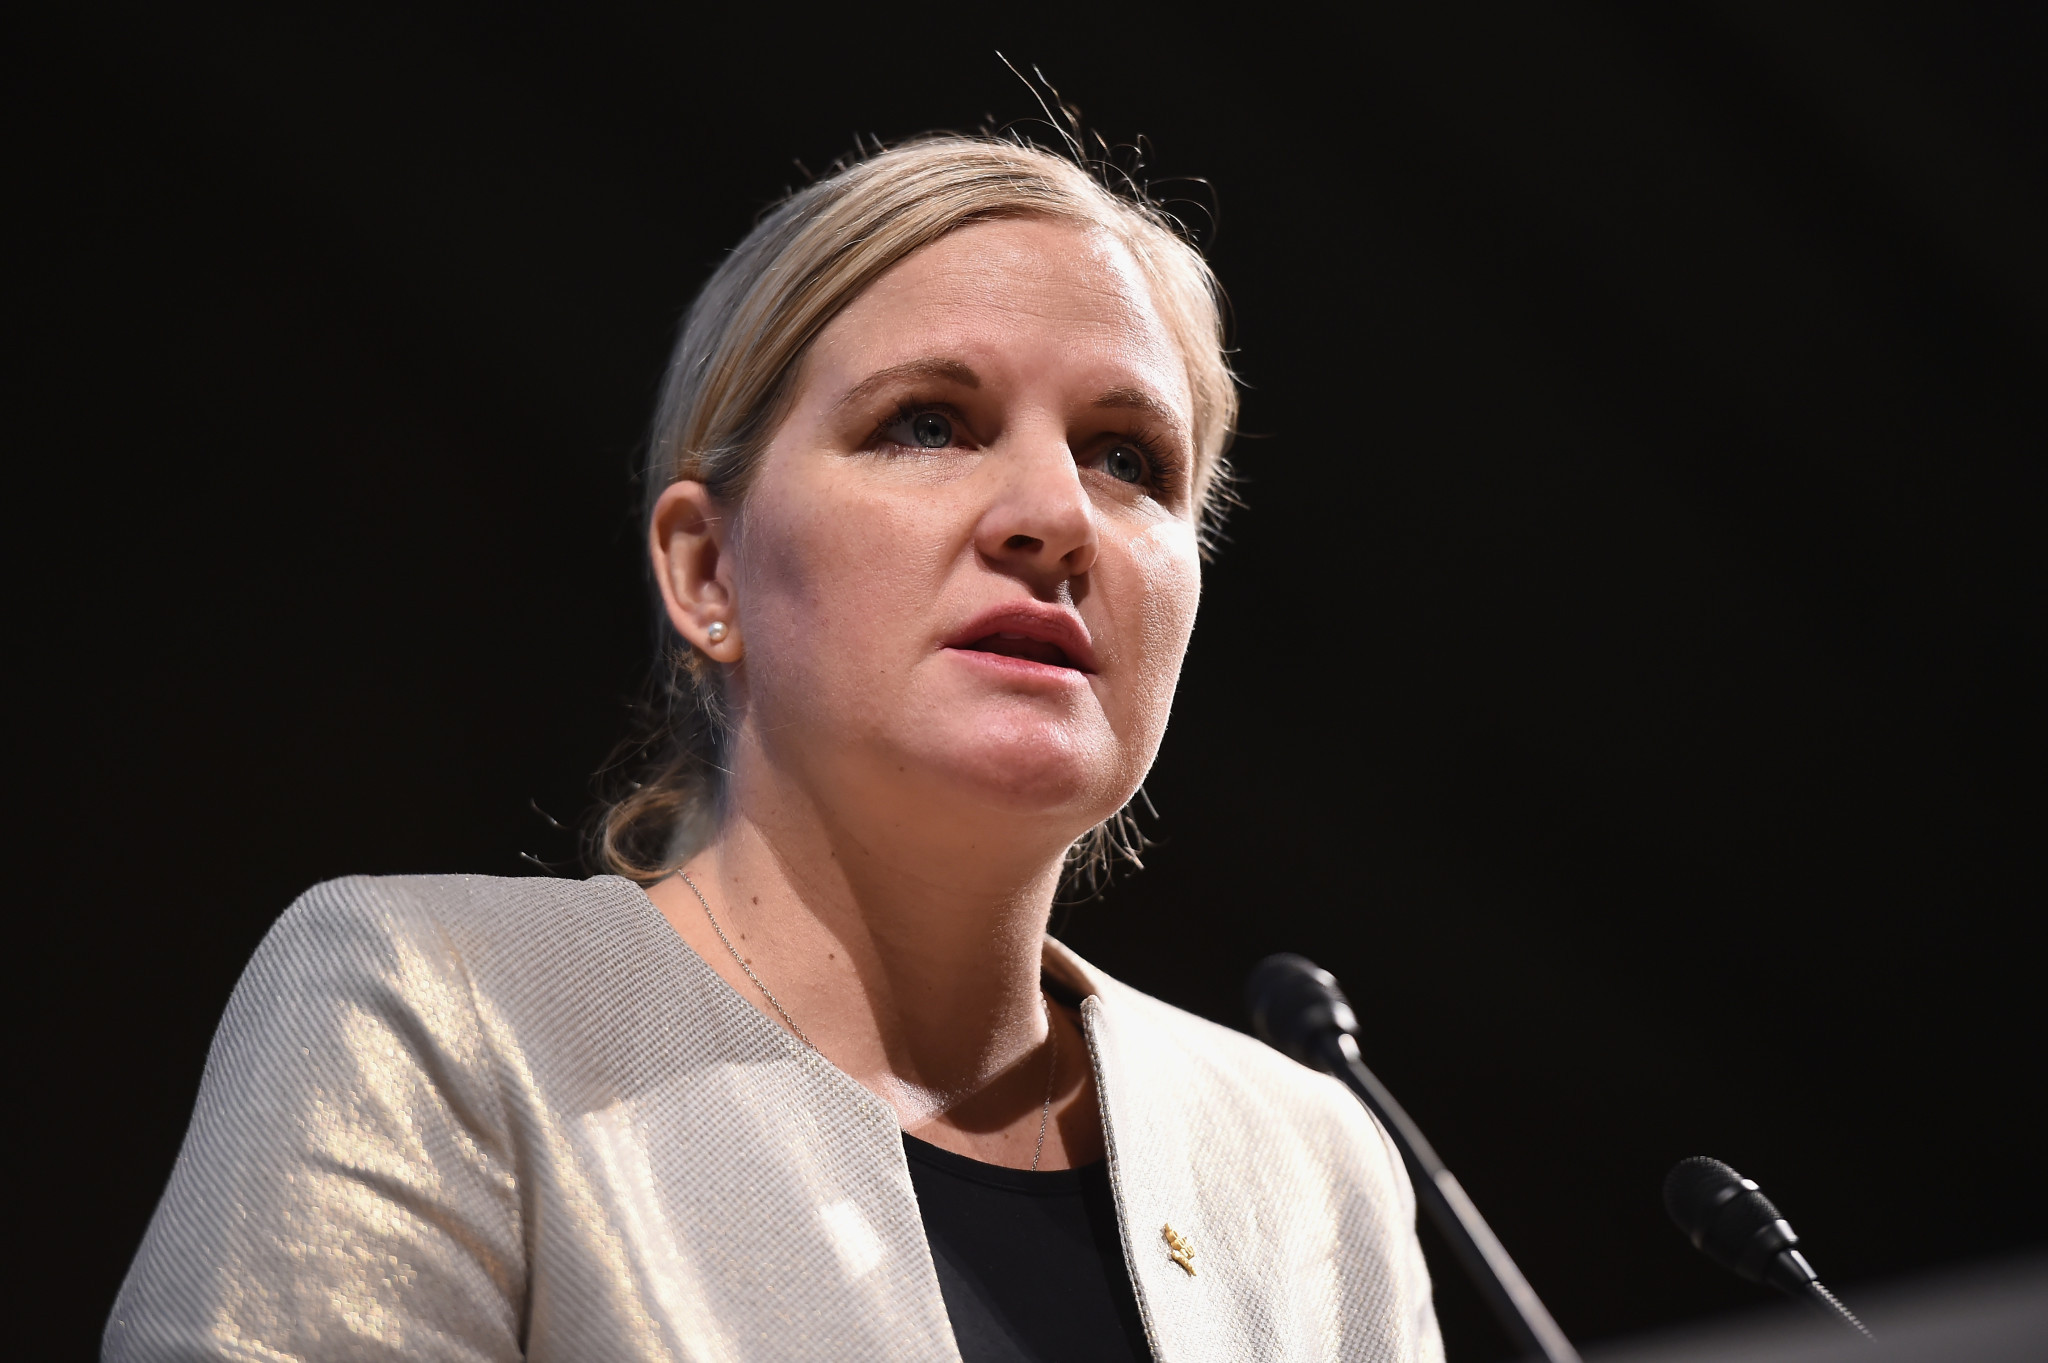 The IOC Athletes' Commission, chaired by Kirsty Coventry, have called for the CRC to recommend immediate action on RUSADA ©Getty Images